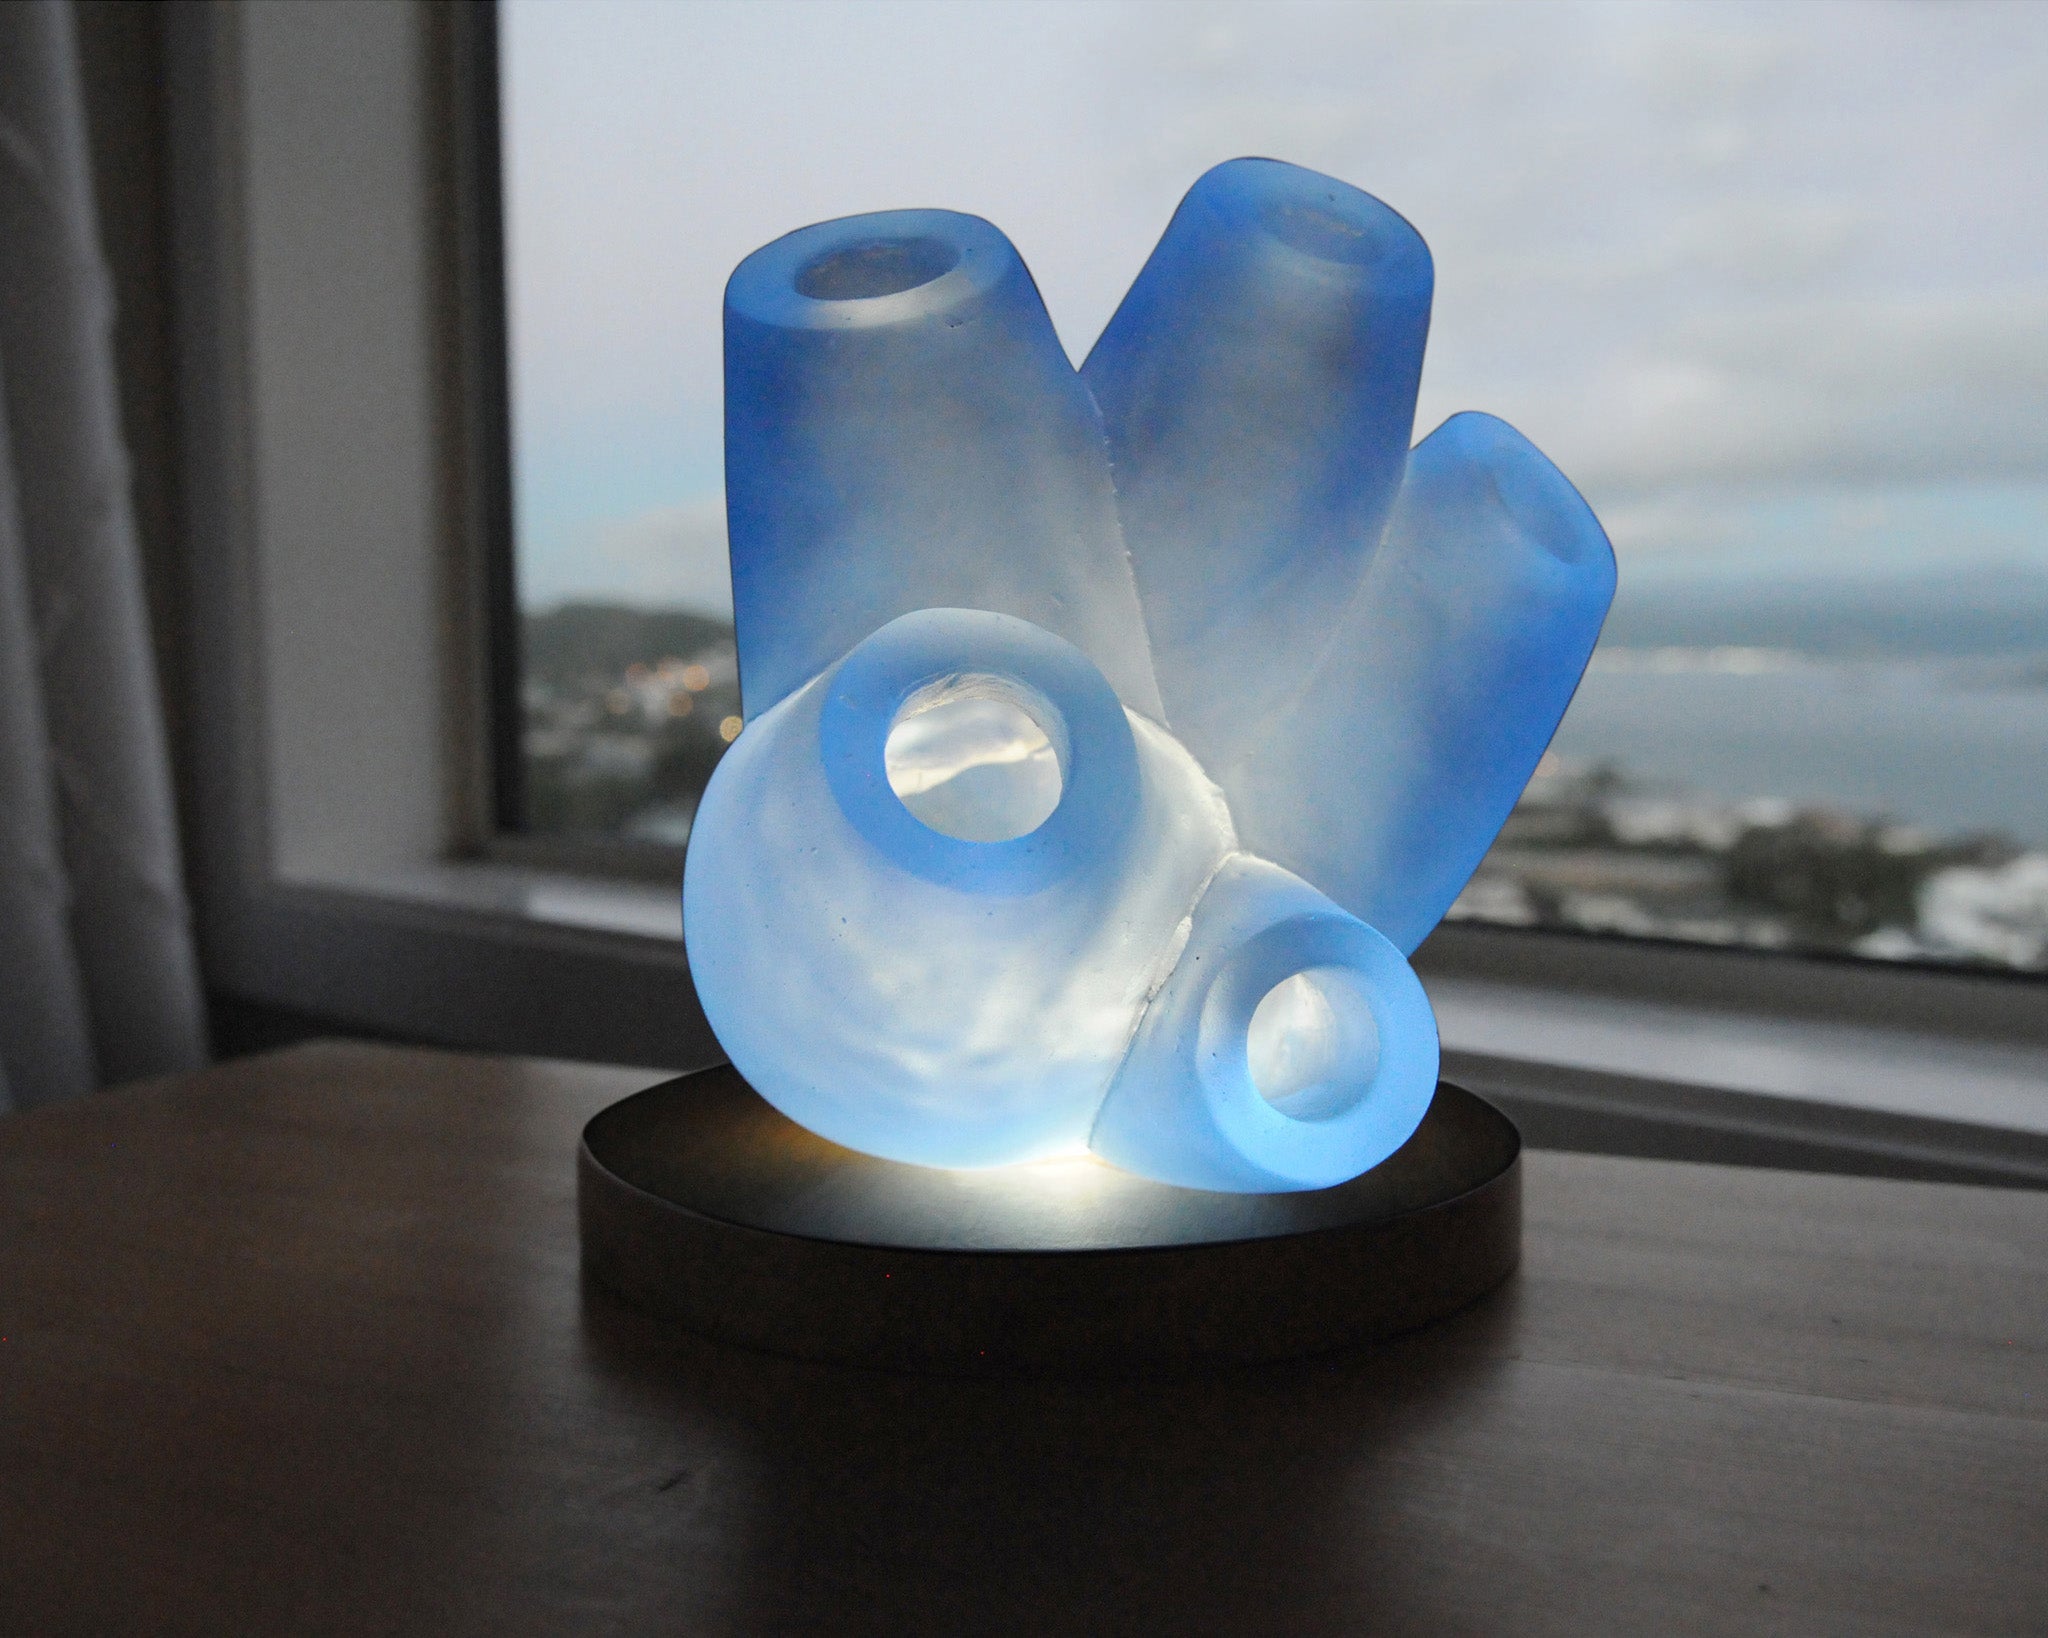 Abstract cast glass sculpture of a sea squirt for sale by Stephen Williams.